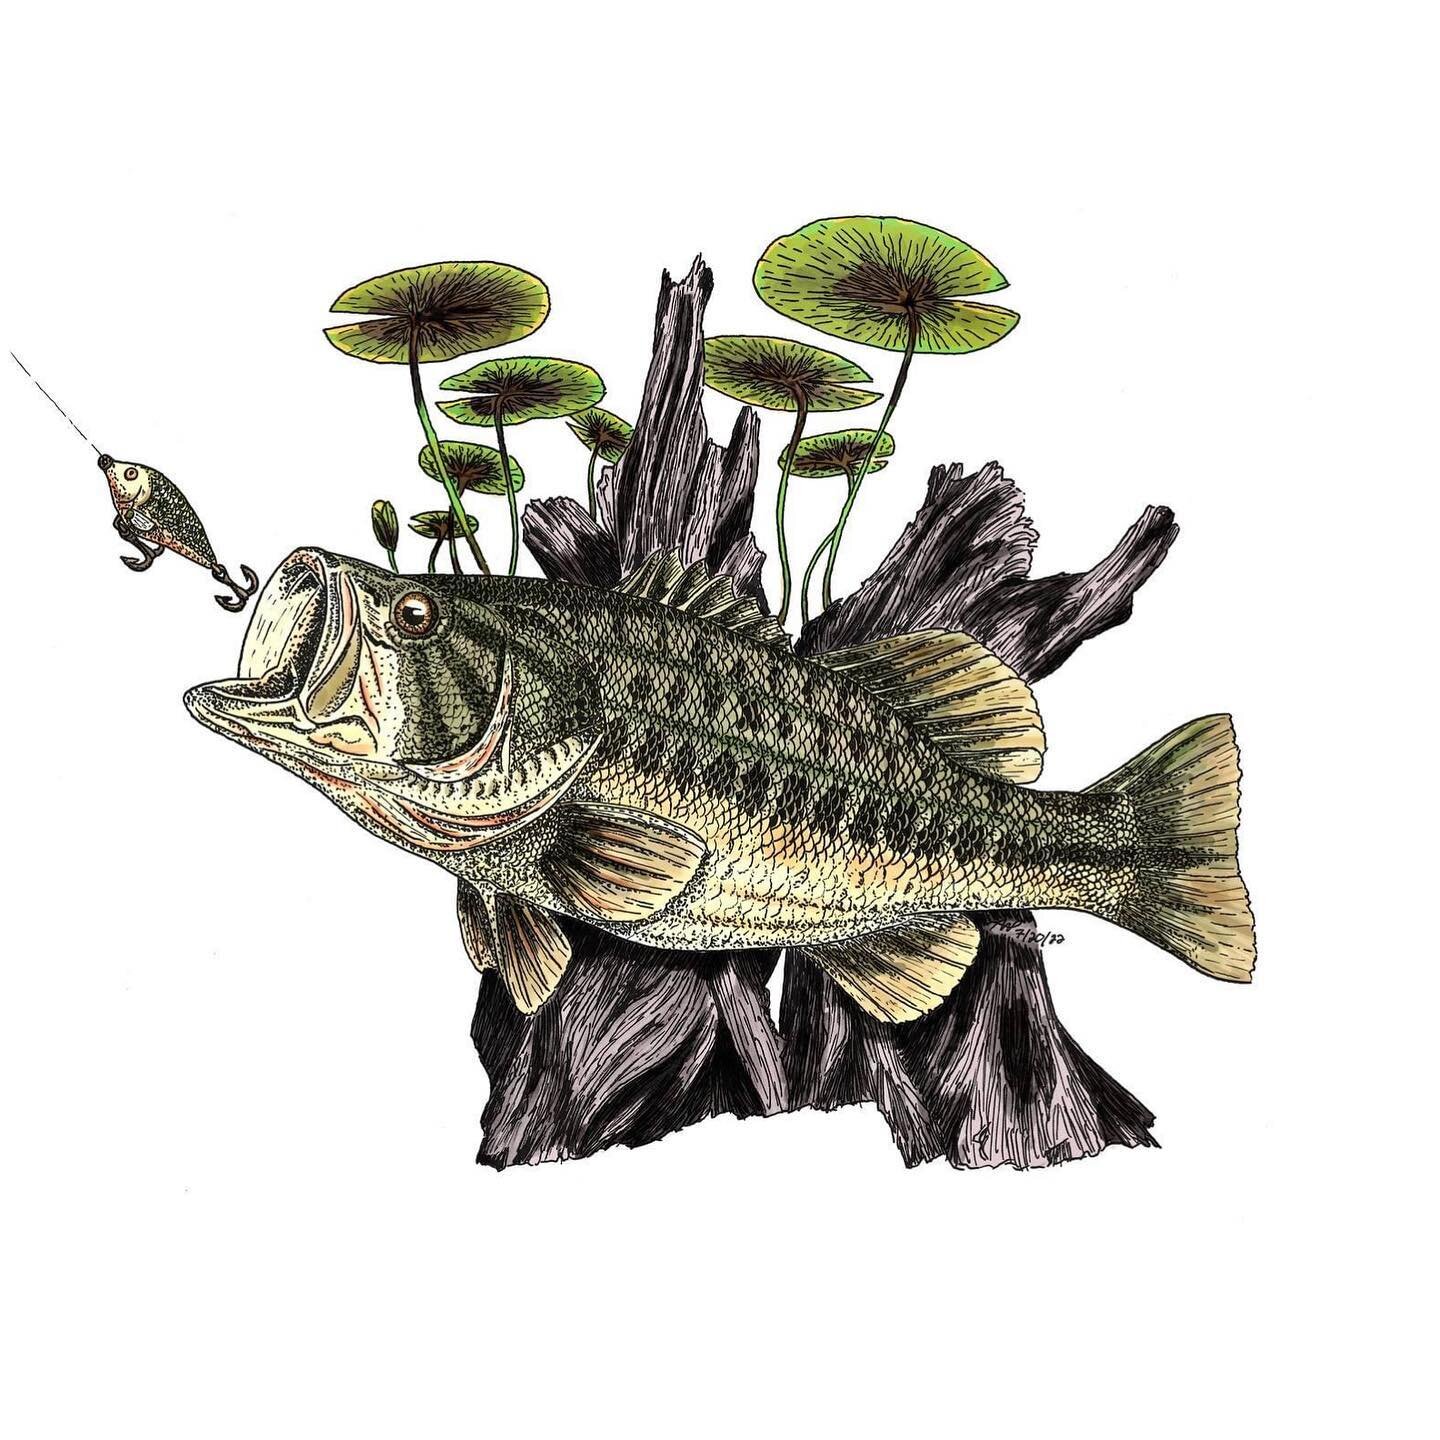 Finally got around to finishing this. I inked it with a Hunt Extra Fine Bowl Point nib and Speedball ink on an A4 piece of bristol paper. I used photoshop to paint it digitally. 

#largemouthbass #ShowingtheWorldJesus #artwithapurpose #agwmeurope #Sh